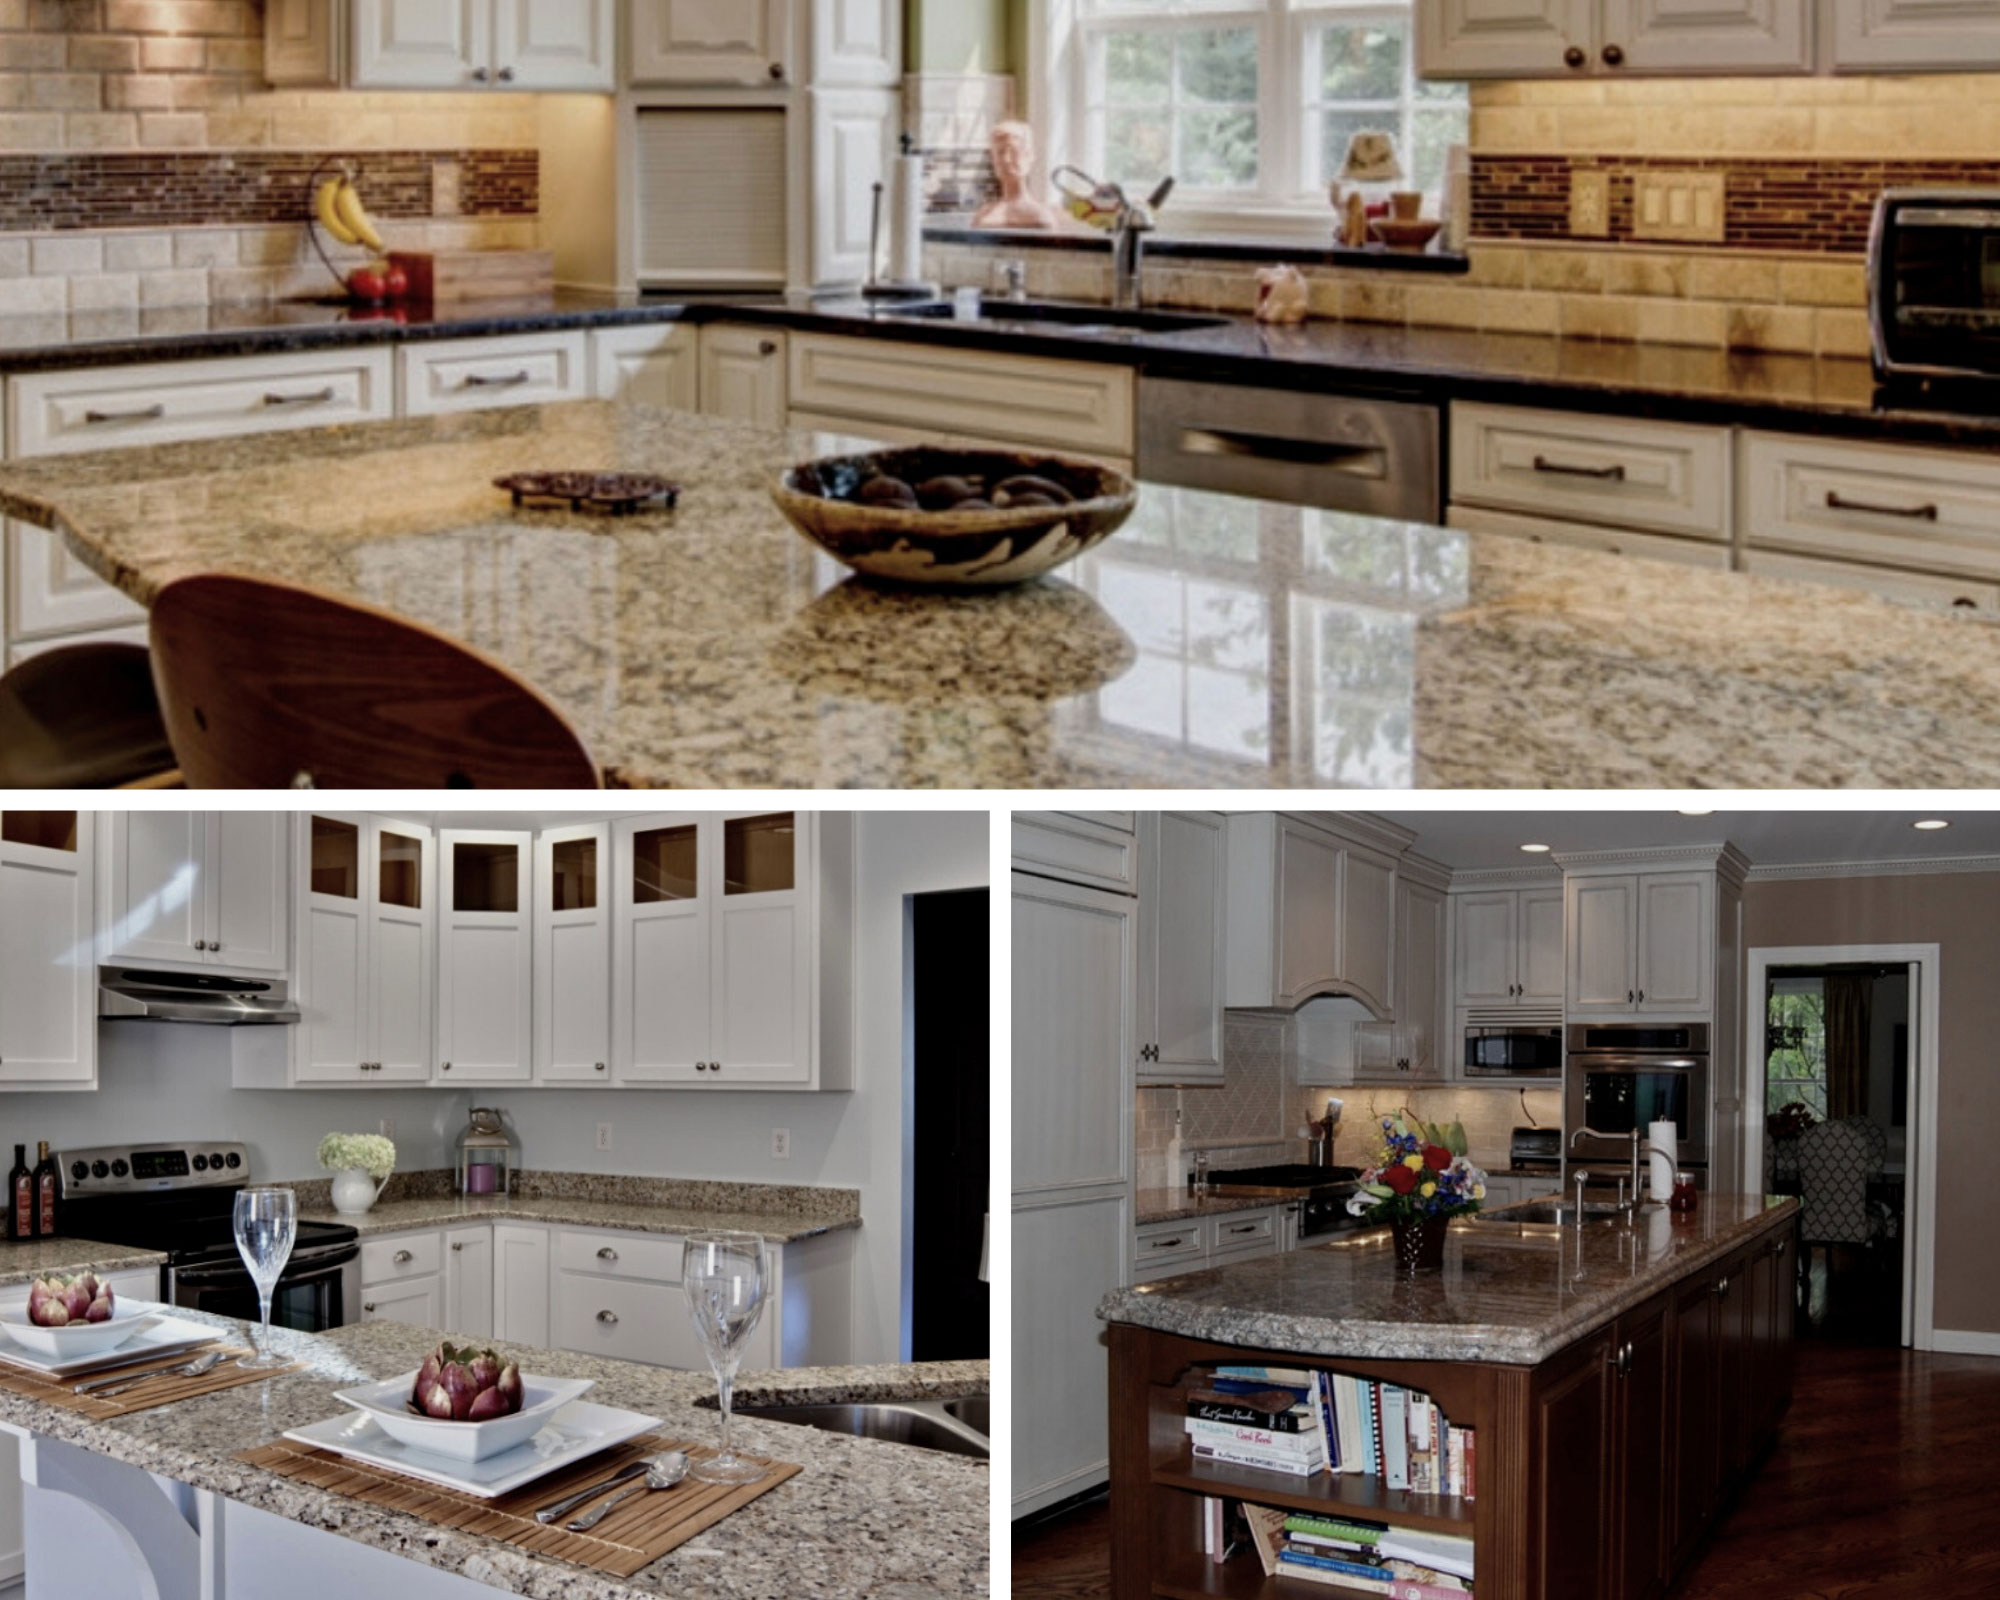 Try to avoid dropping heavy objects on your countertops